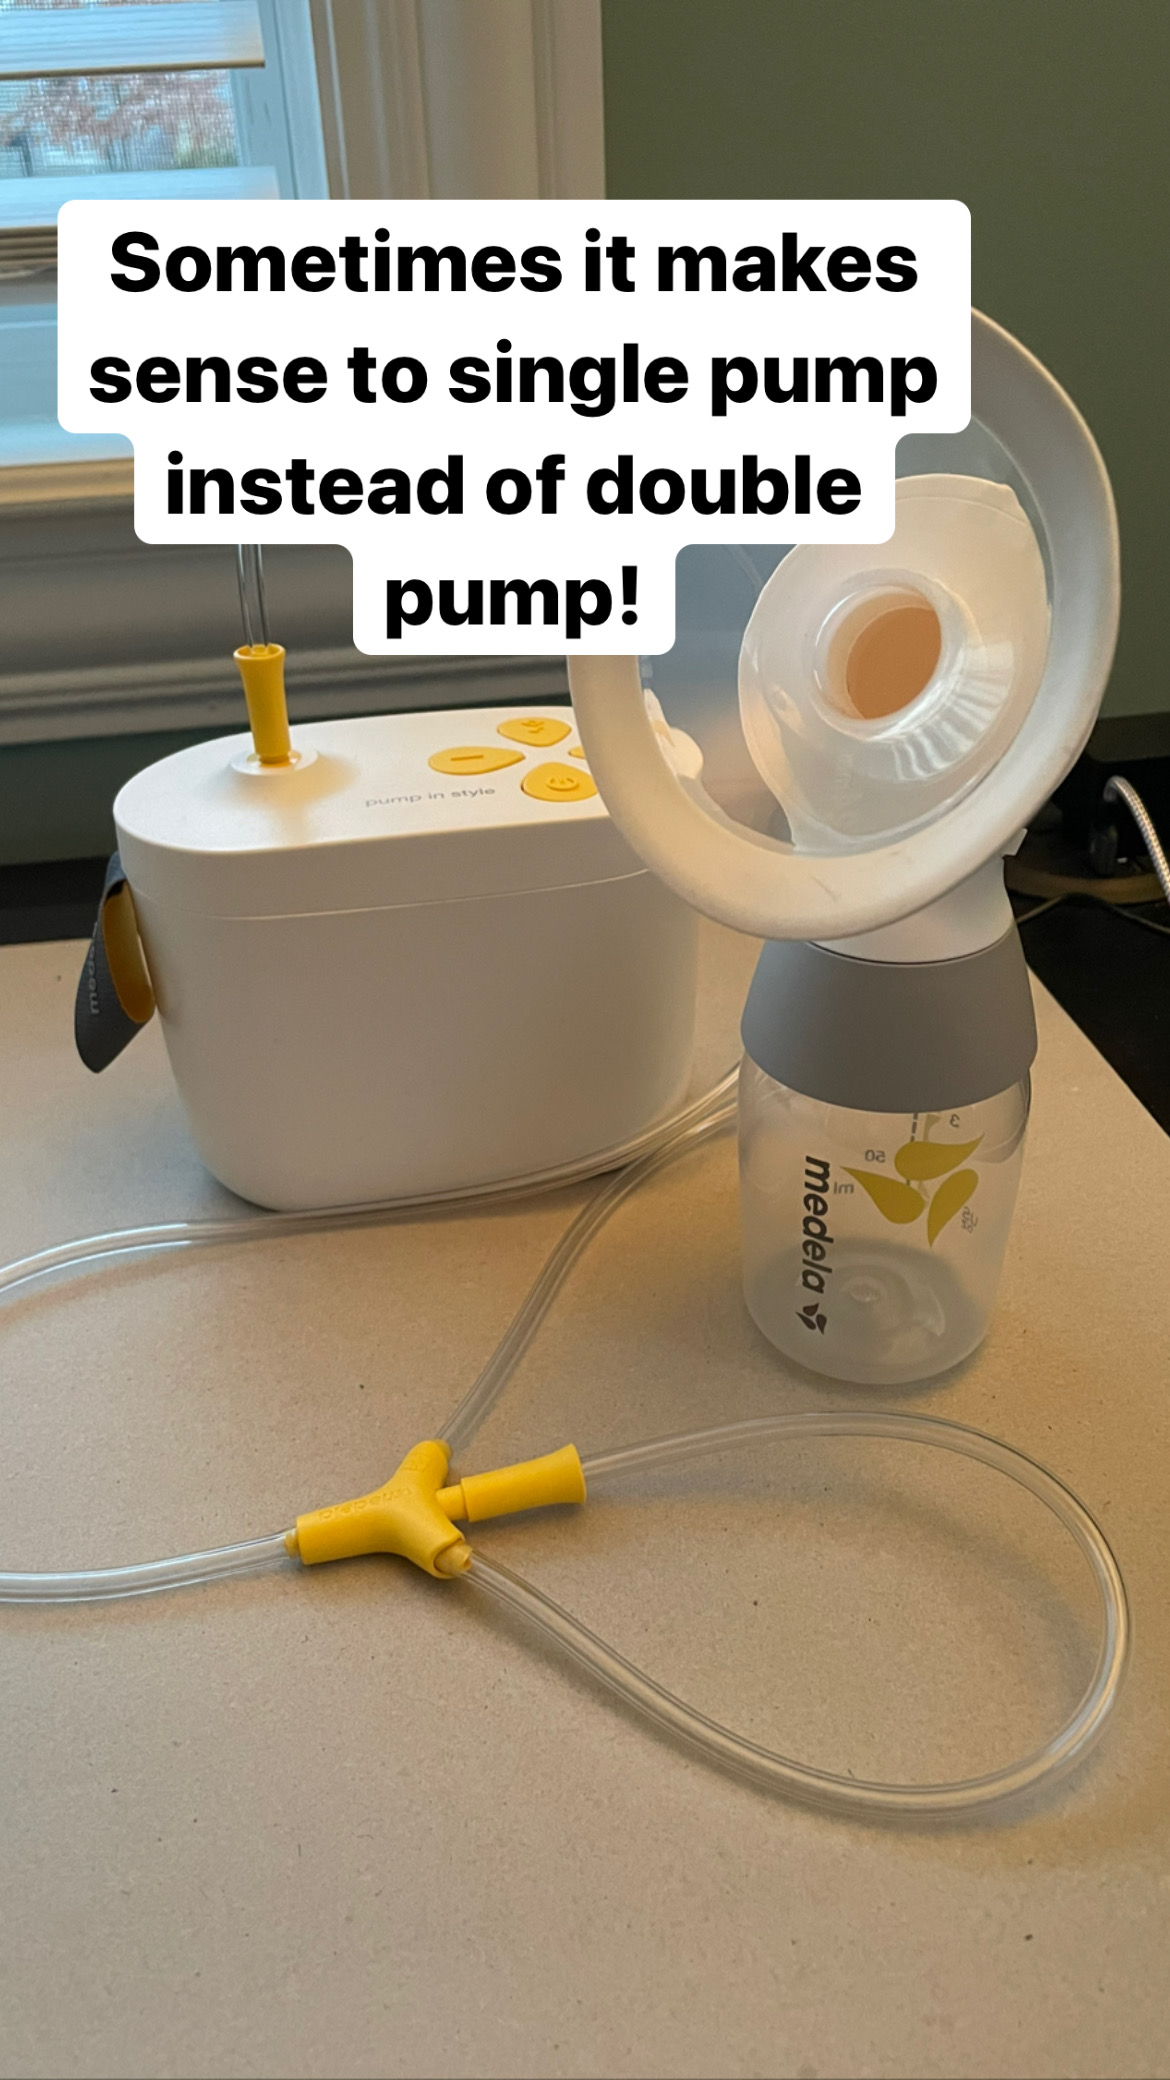 Everything You Need to Know About Medela Breast Pumps